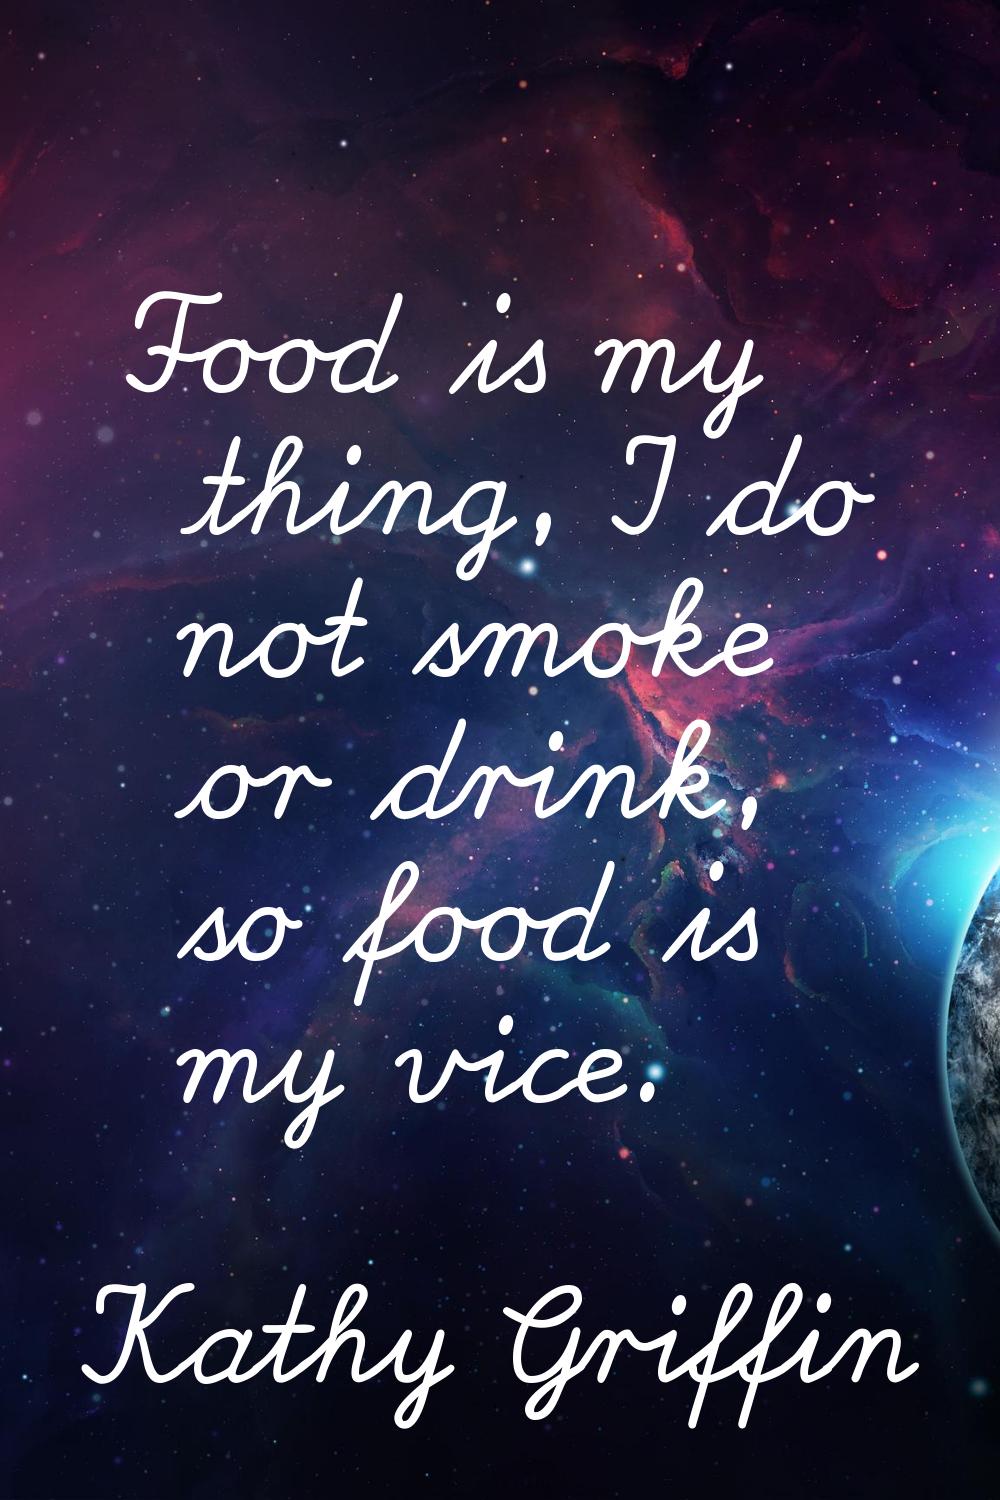 Food is my thing, I do not smoke or drink, so food is my vice.